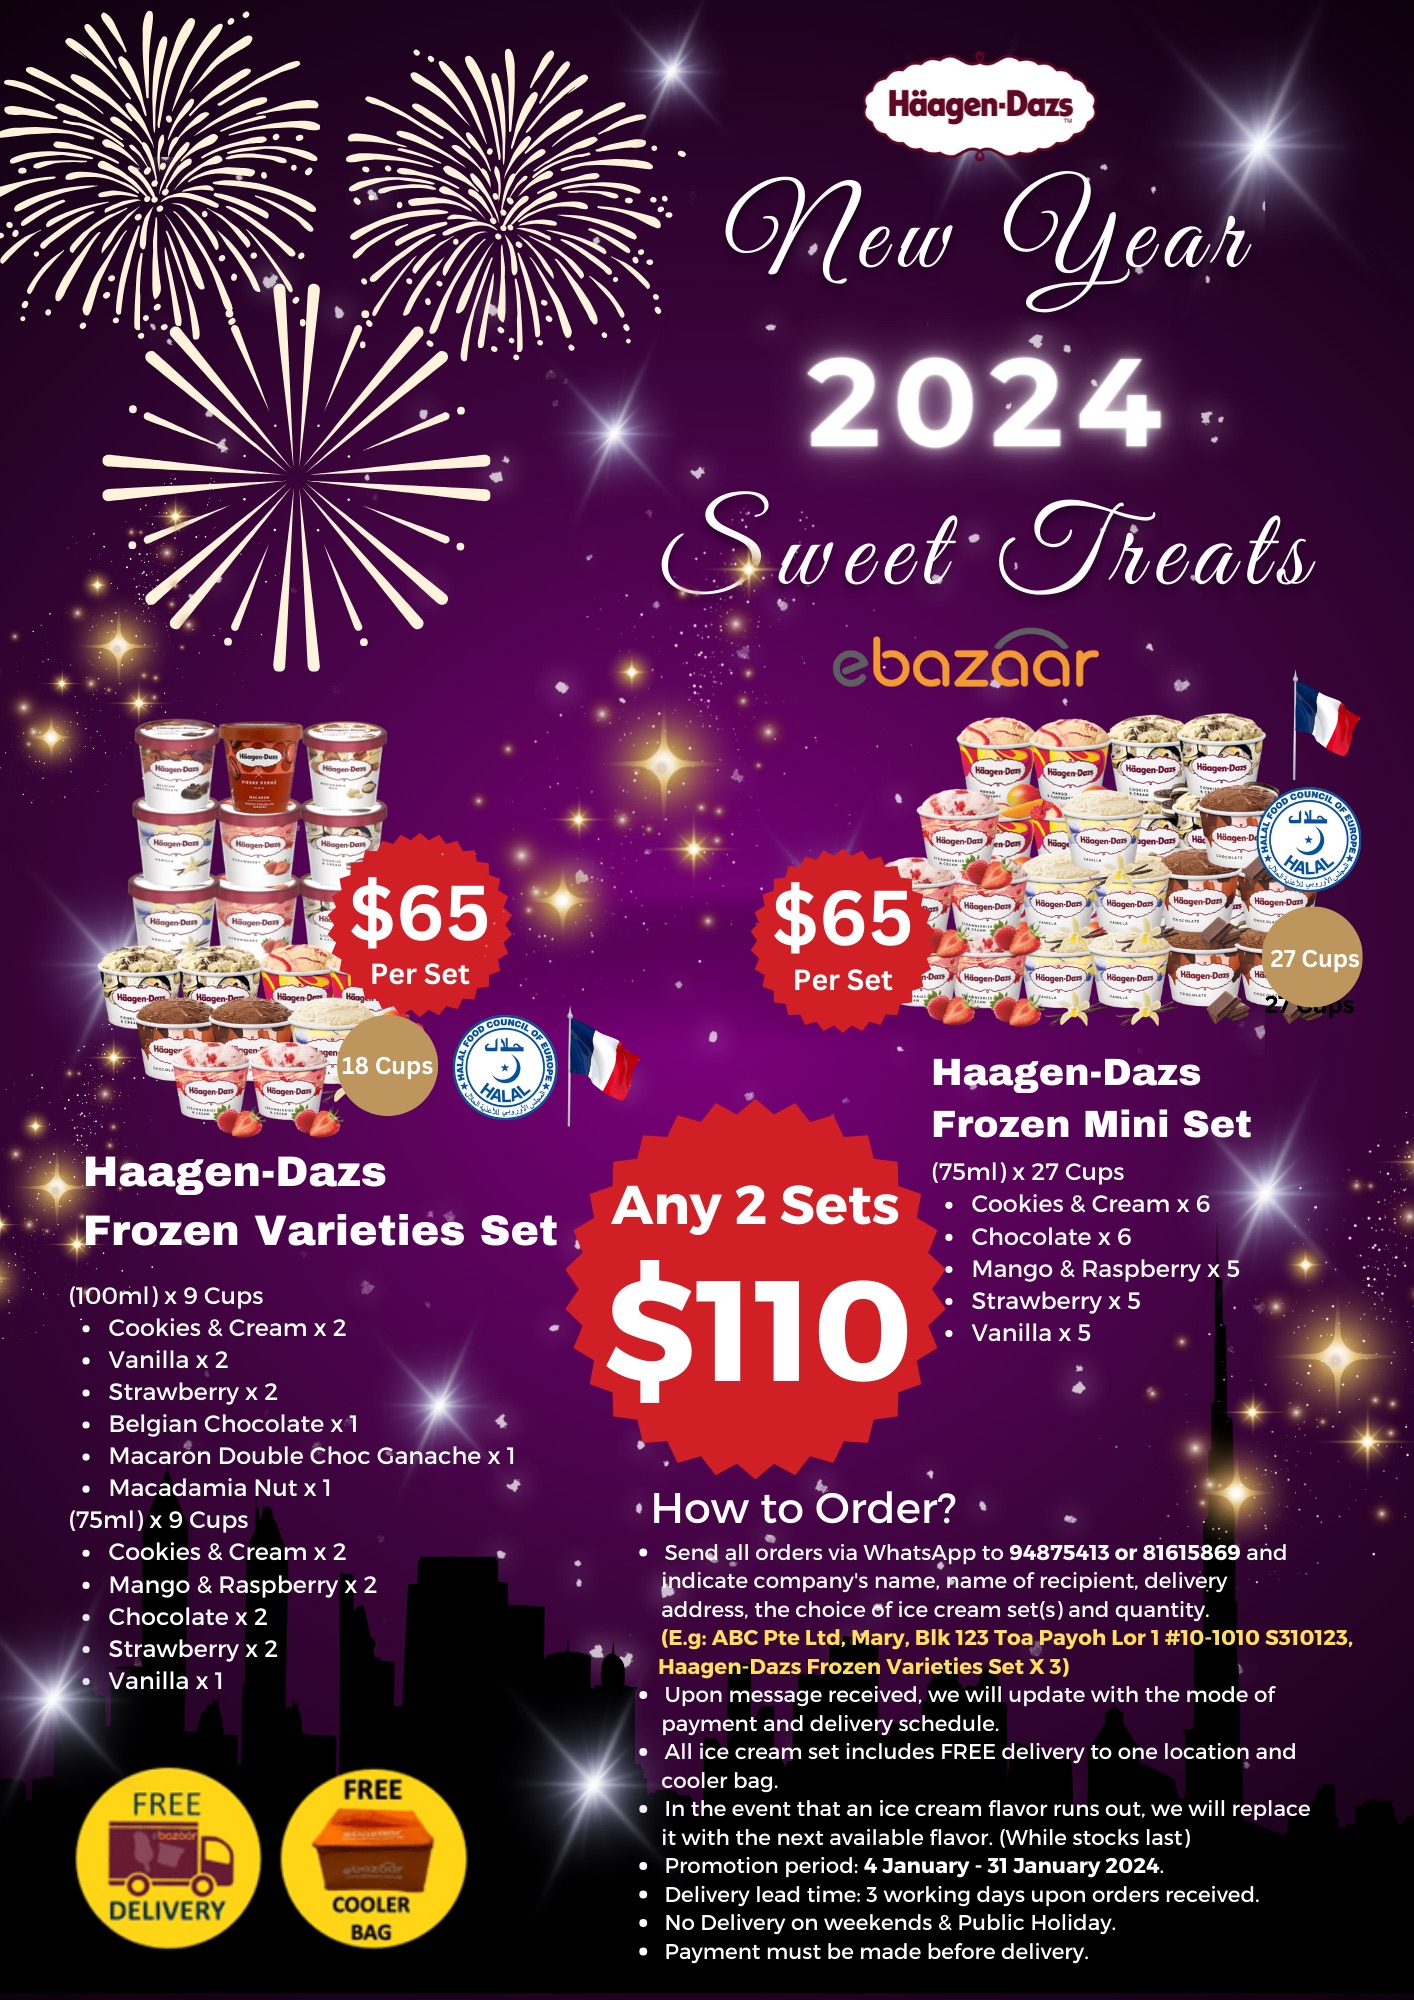 HaagenDazs Promotion Jan 2024 Ministry of Education Sports and